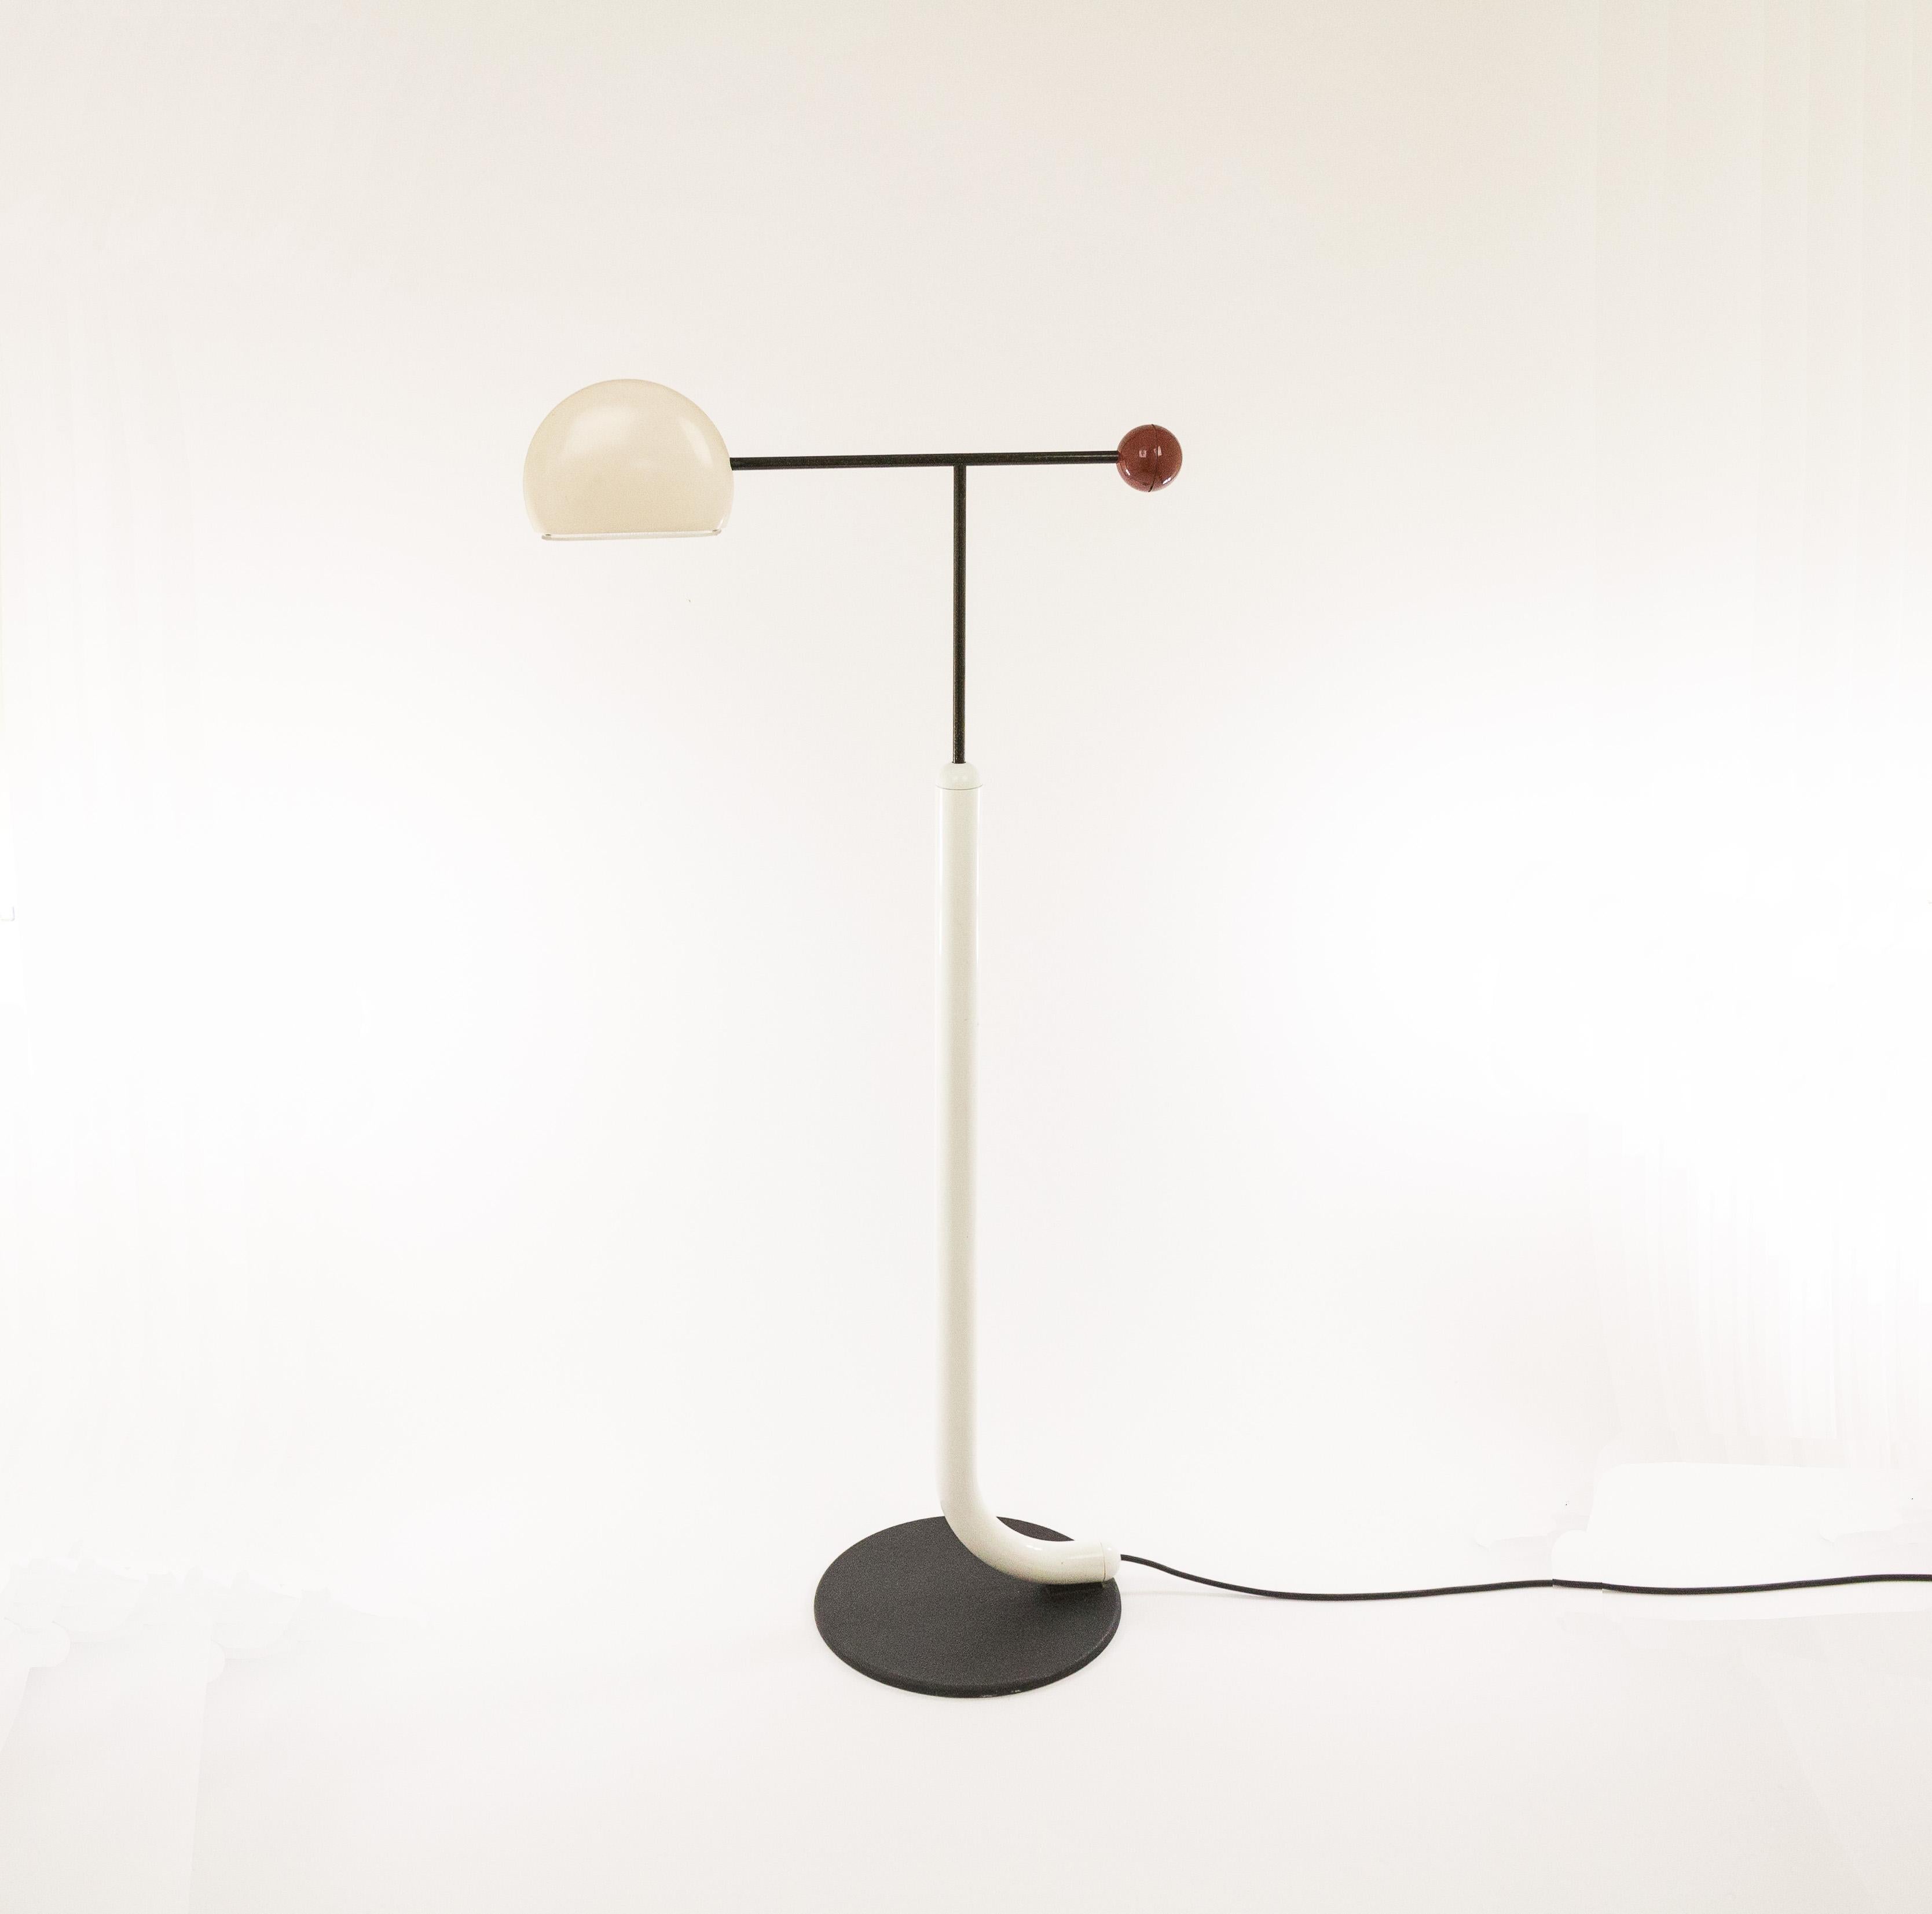 Floor lamp Tomo by Japanese designer Toshiyuki Kita for Luci, 1985.

As indicated in 1985 in an advertisement by Luci (translated from Italian): 